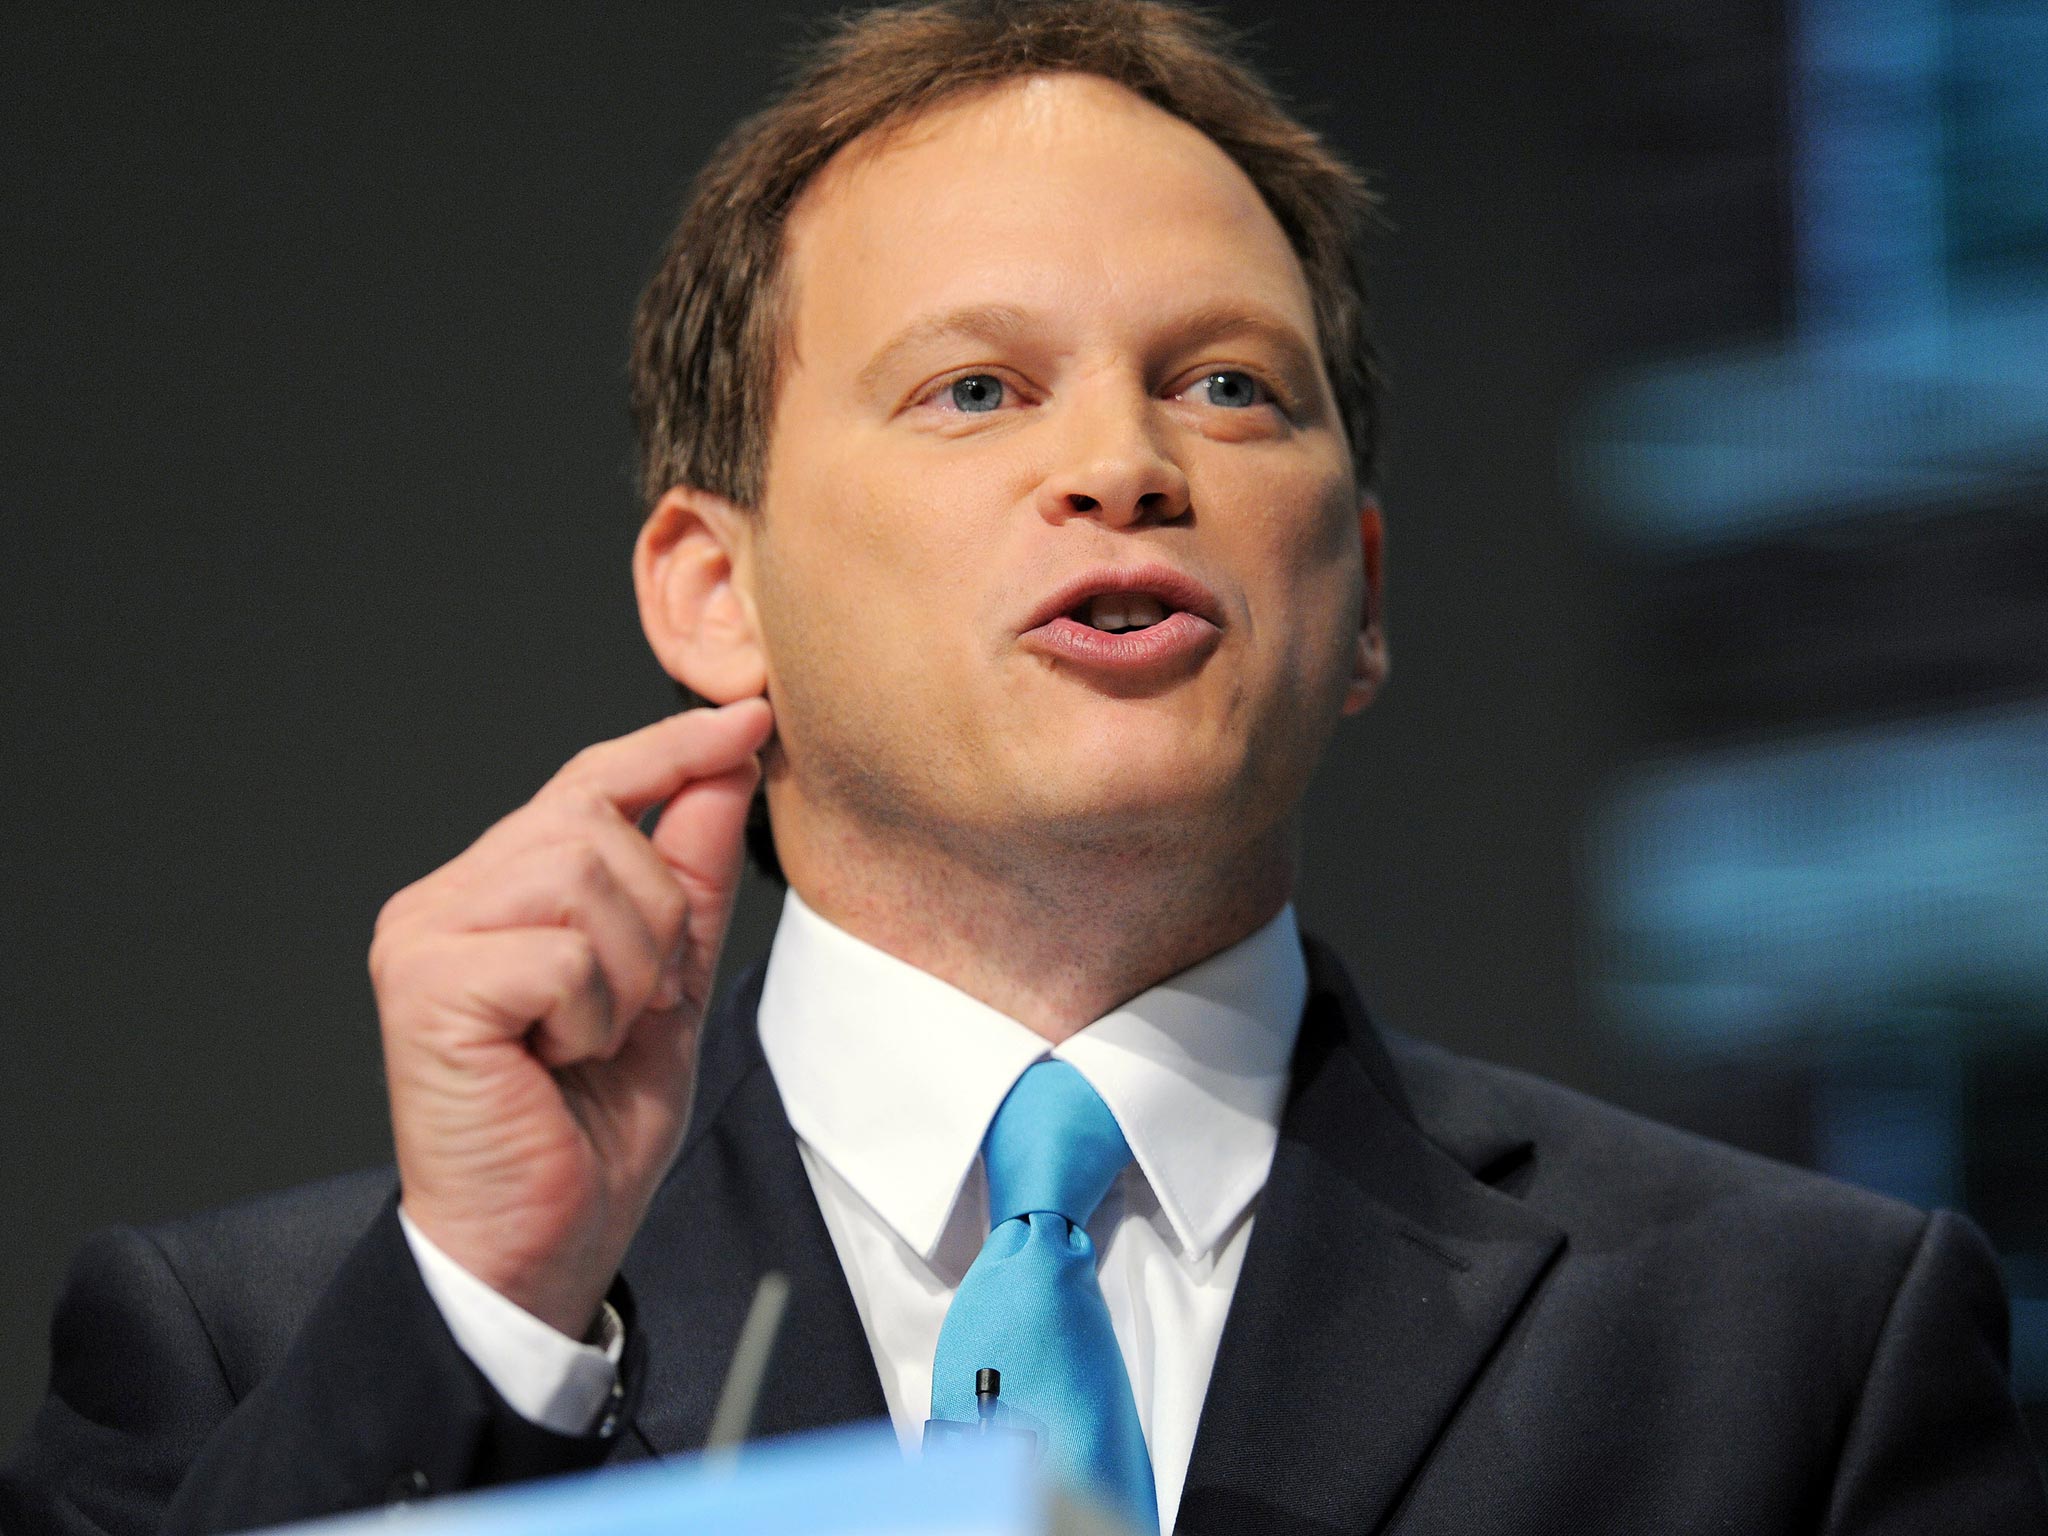 Grant Shapps held a second job as a “multimillion-dollar web marketer” while also an MP